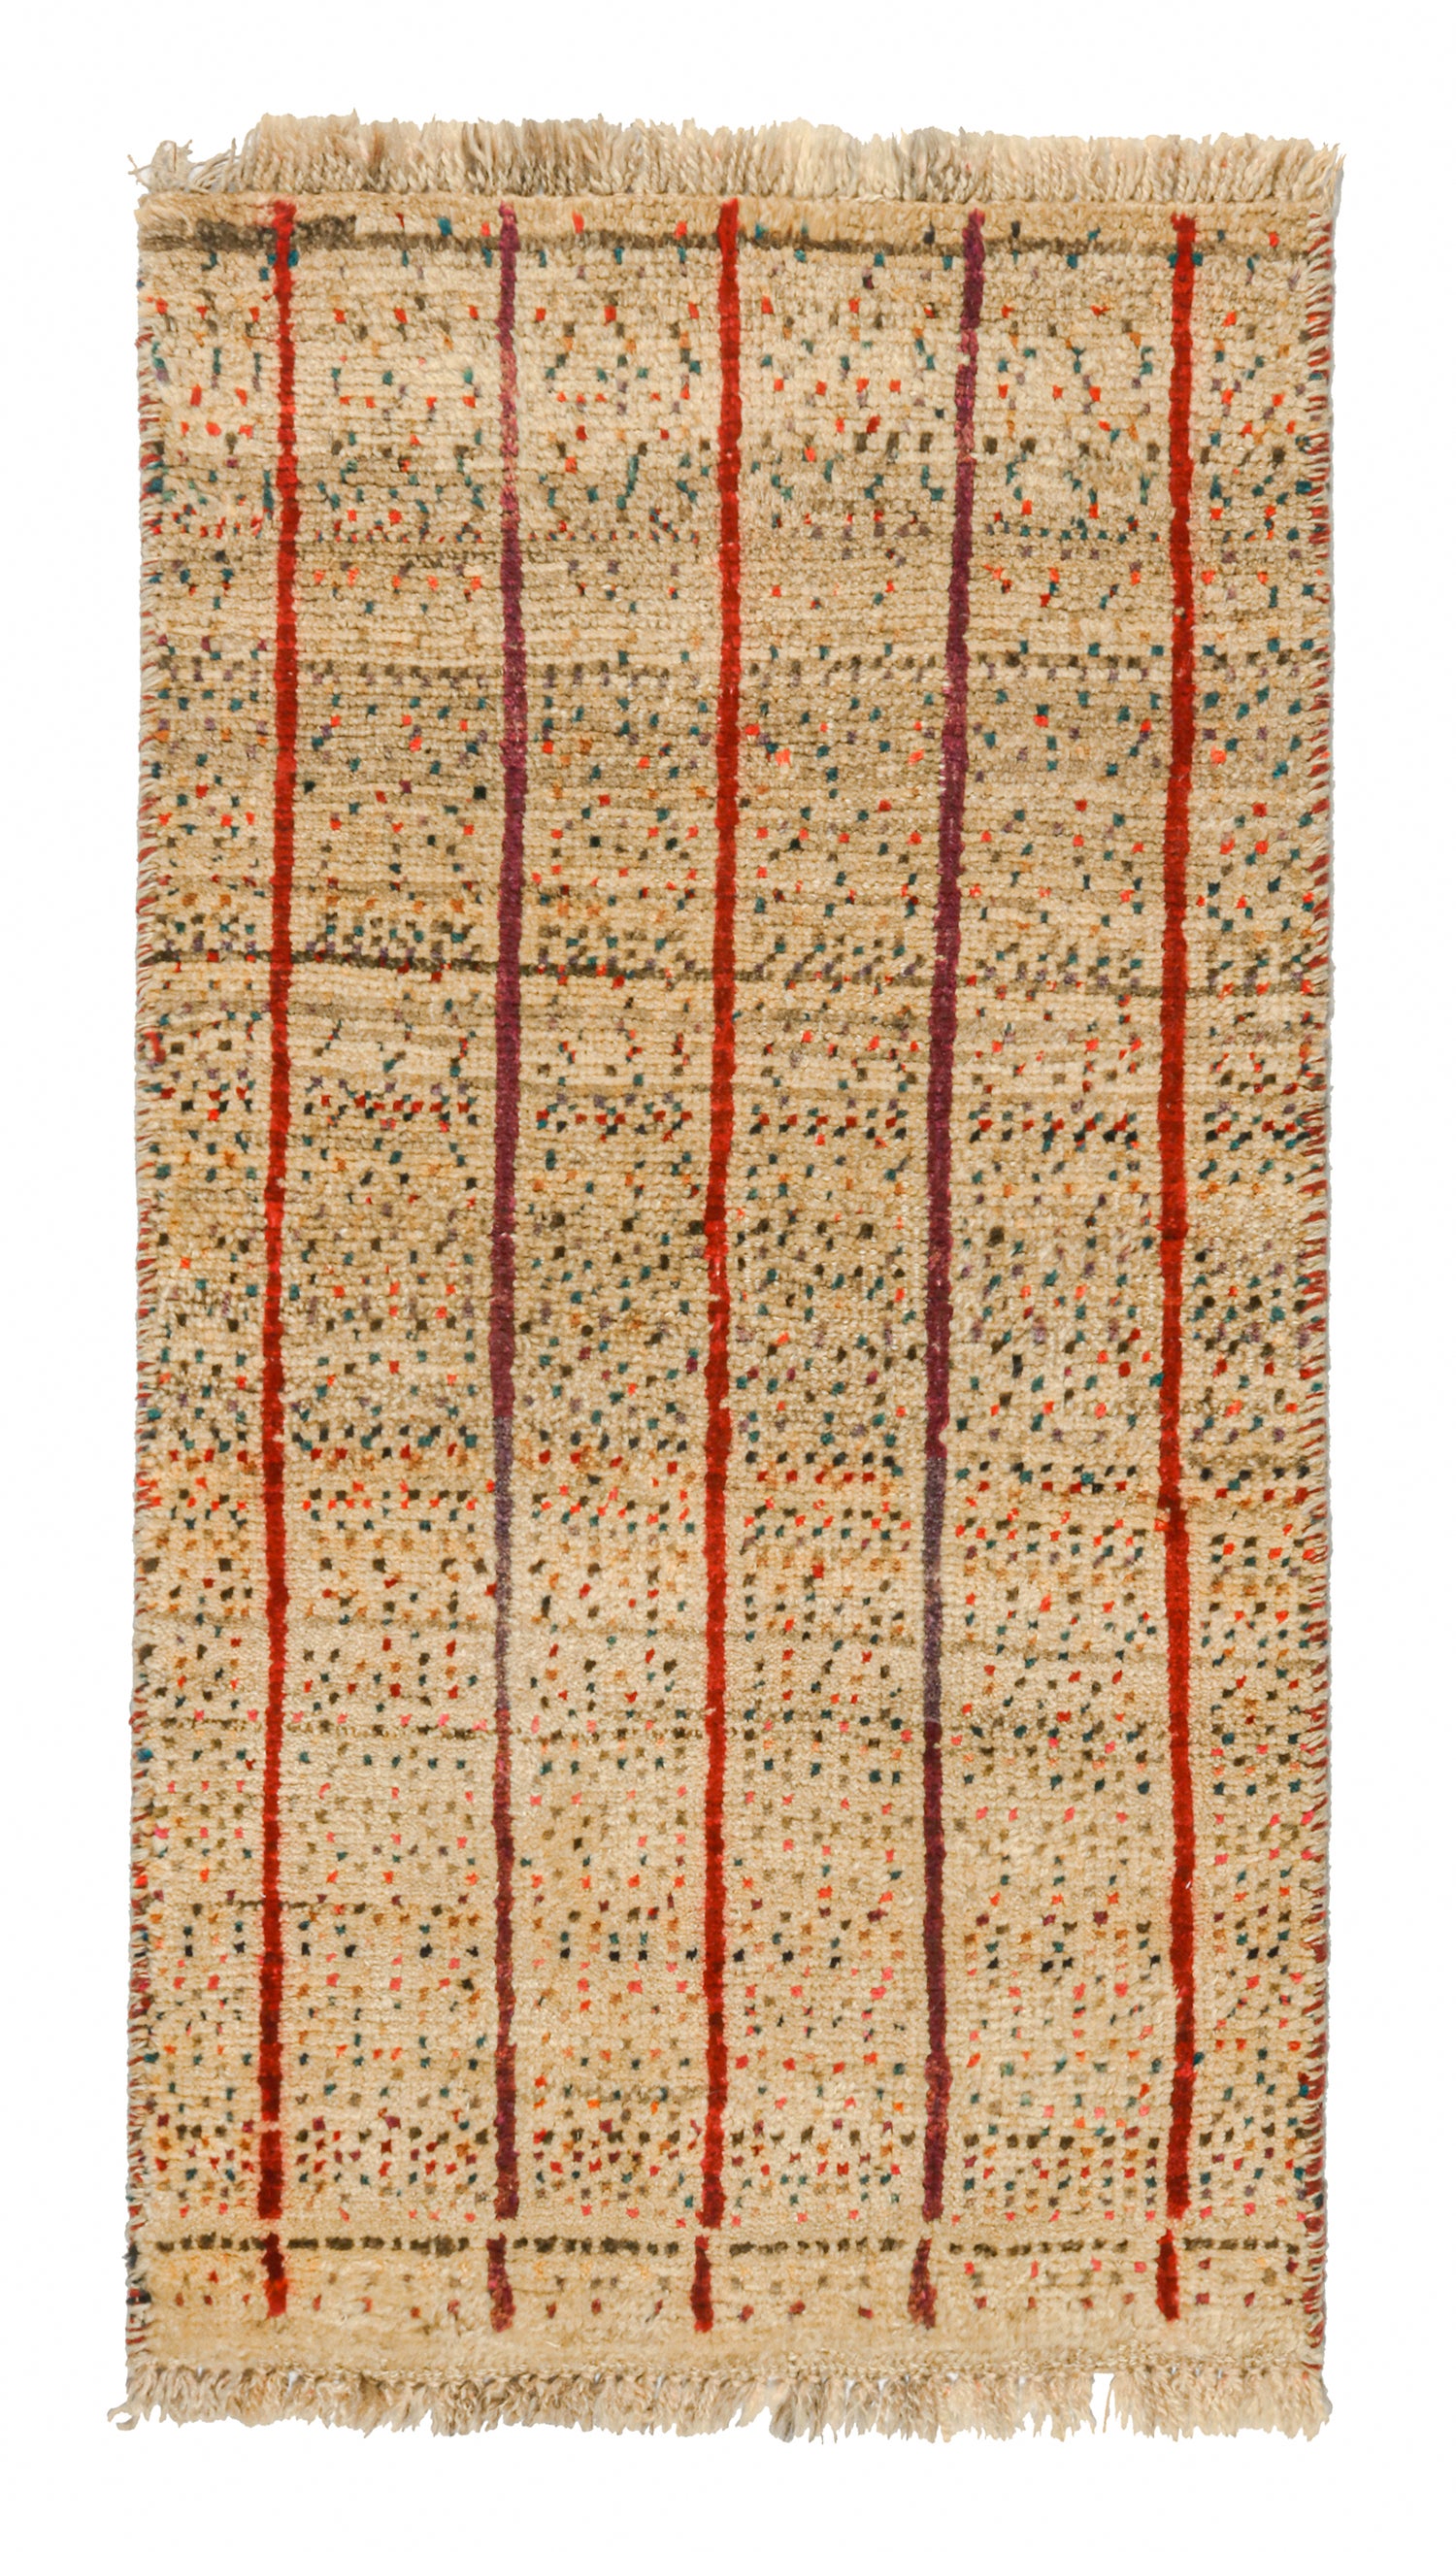 Vintage Gabbeh Tribal Rug in Beige- Red Stripes and Colorful Dots by Rug & Kilim